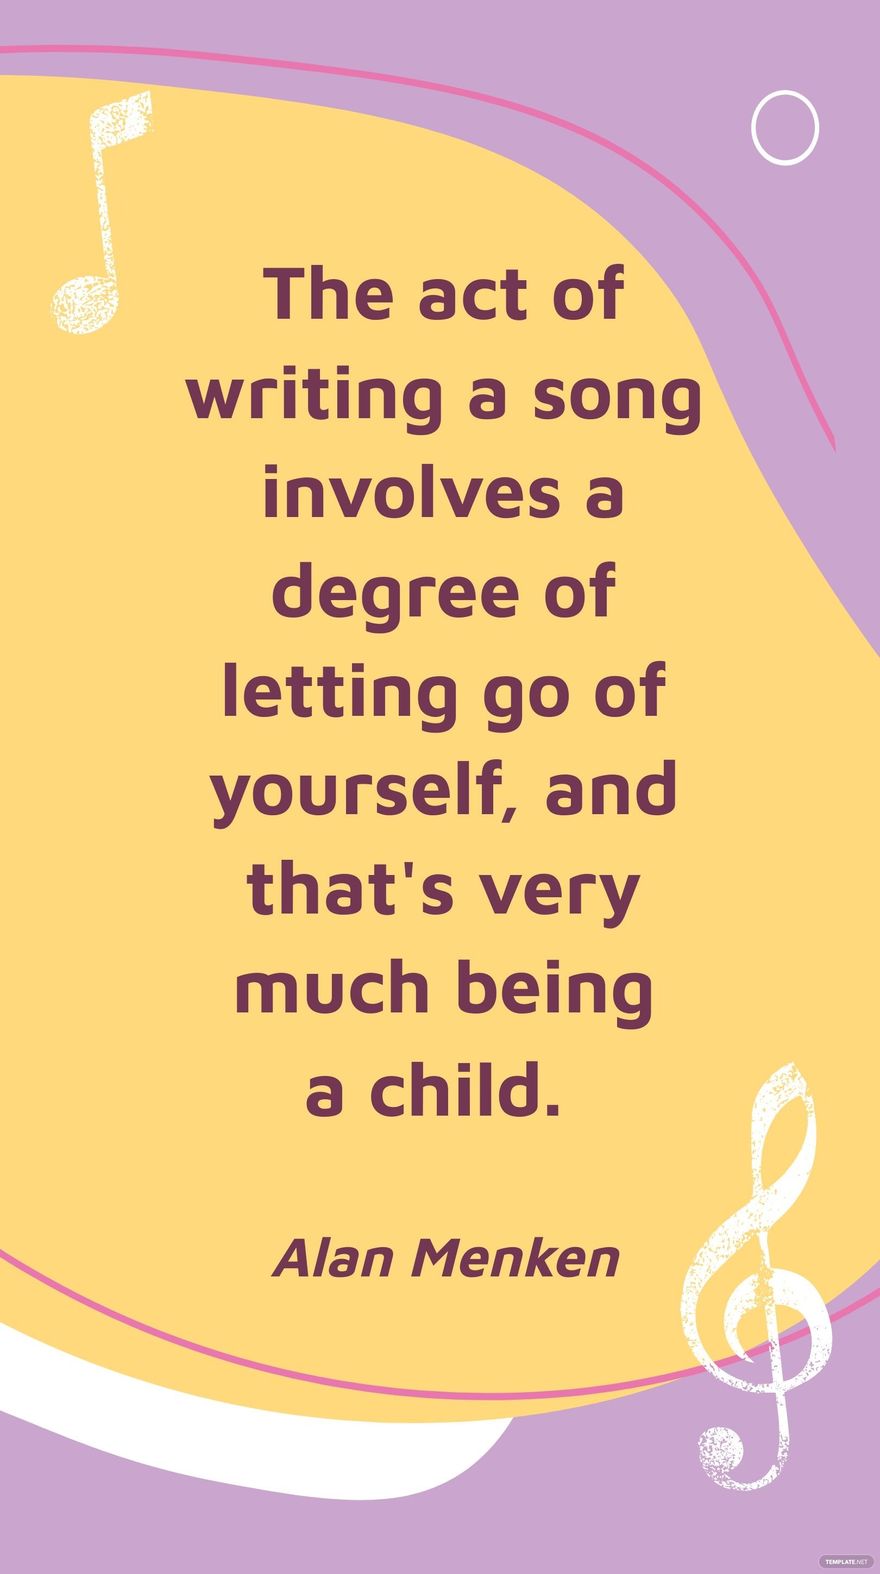 Alan Menken - The act of writing a song involves a degree of letting go of yourself, and that's very much being a child. in JPG